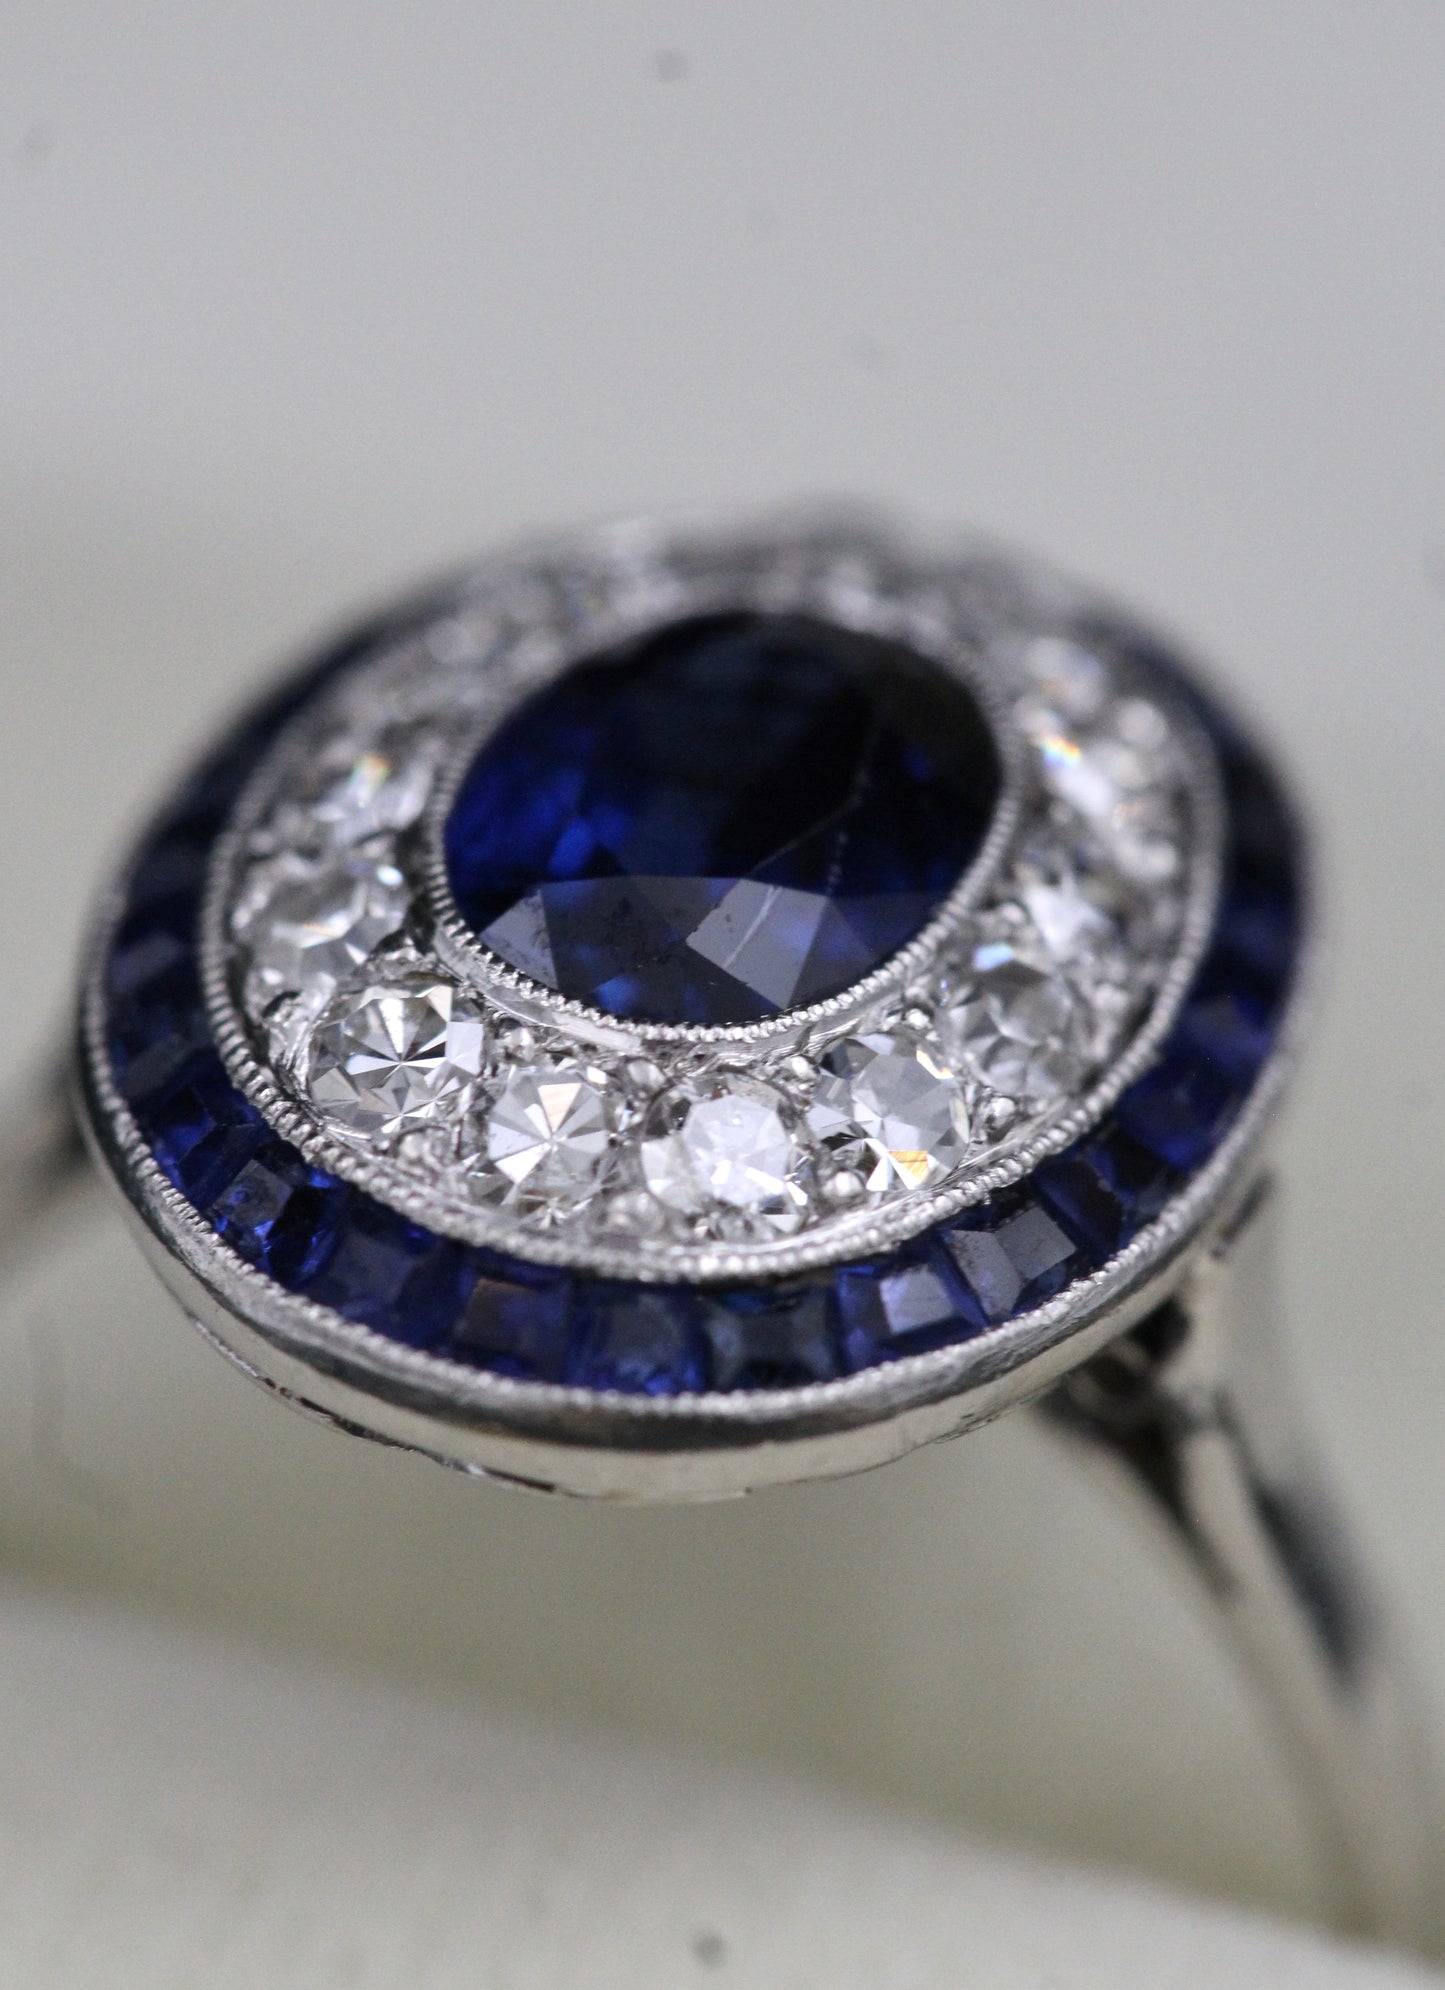 A very fine Platinum, Diamond & Sapphire Oval Target Ring, centrally Rub-over set with an Unheated Burma Sapphire. French. Circa 1930. - Robin Haydock Antiques